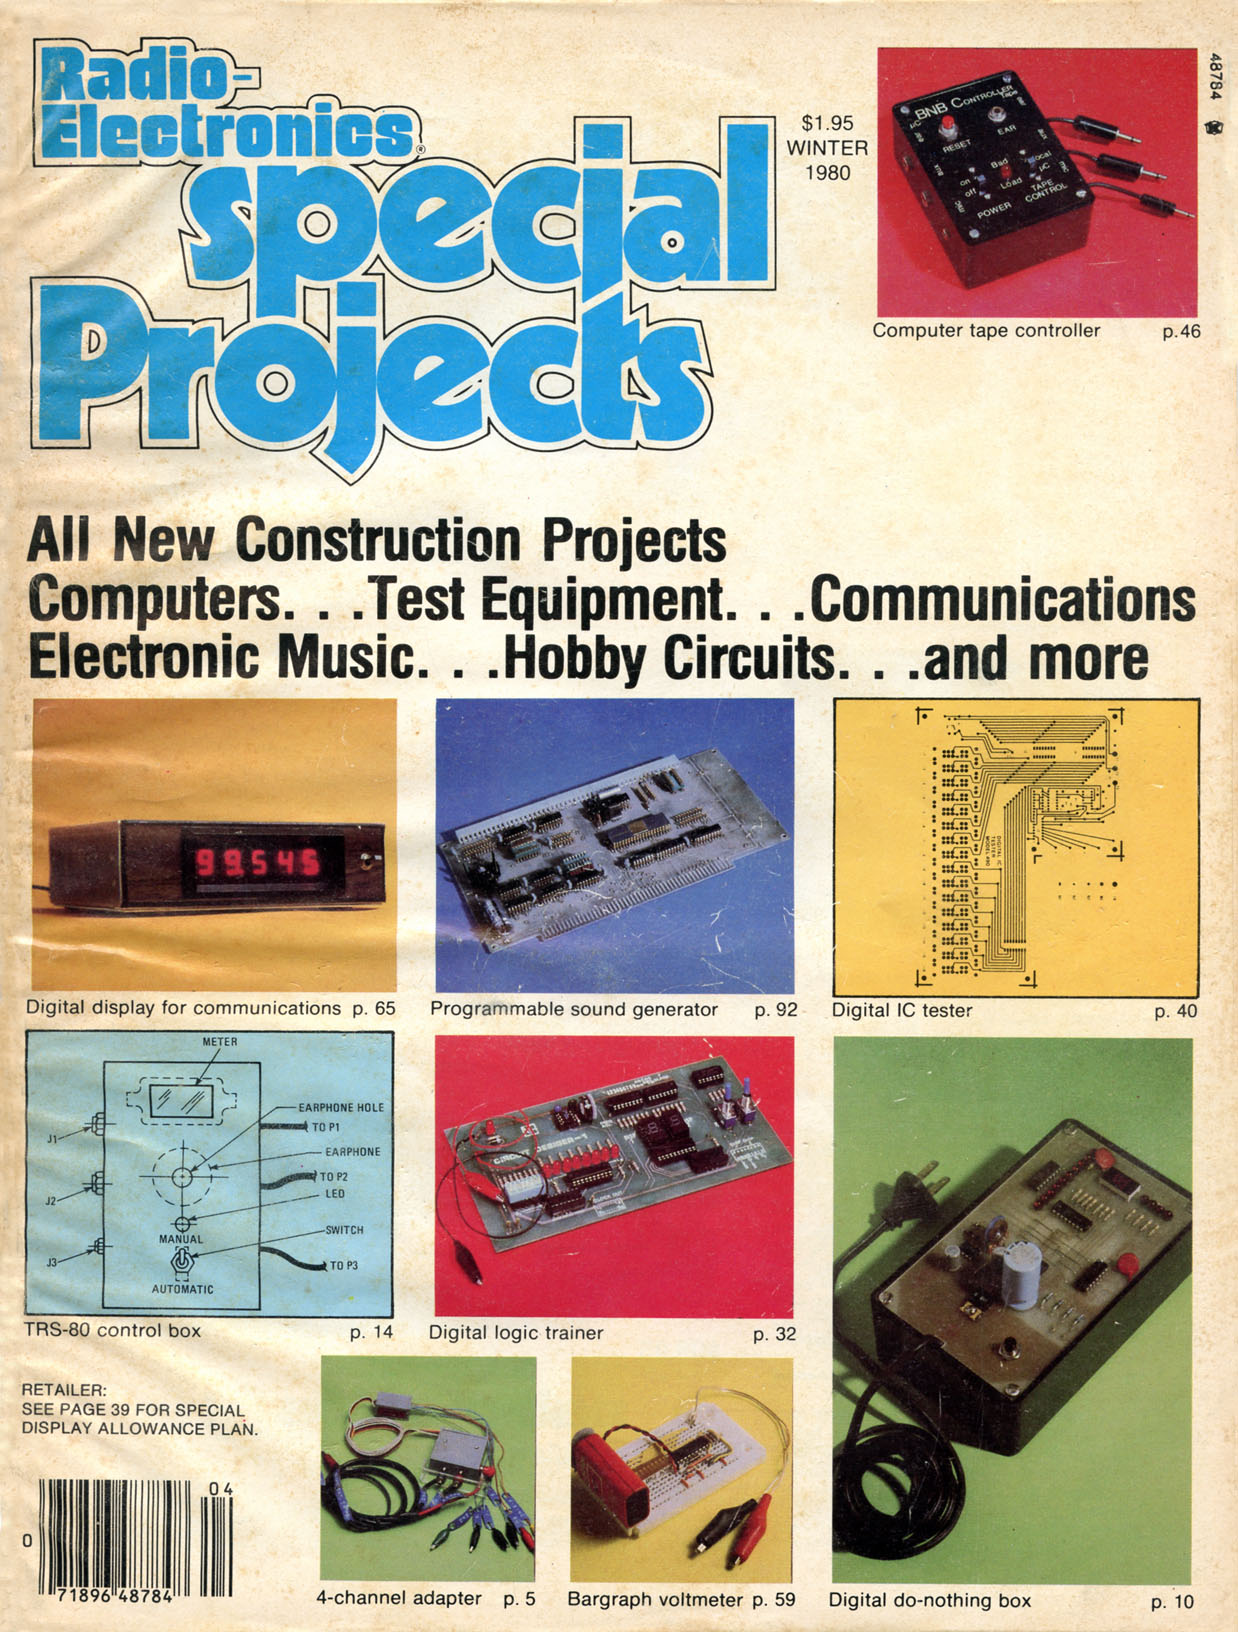 Radio-Electronics Special Projects Winter 1980